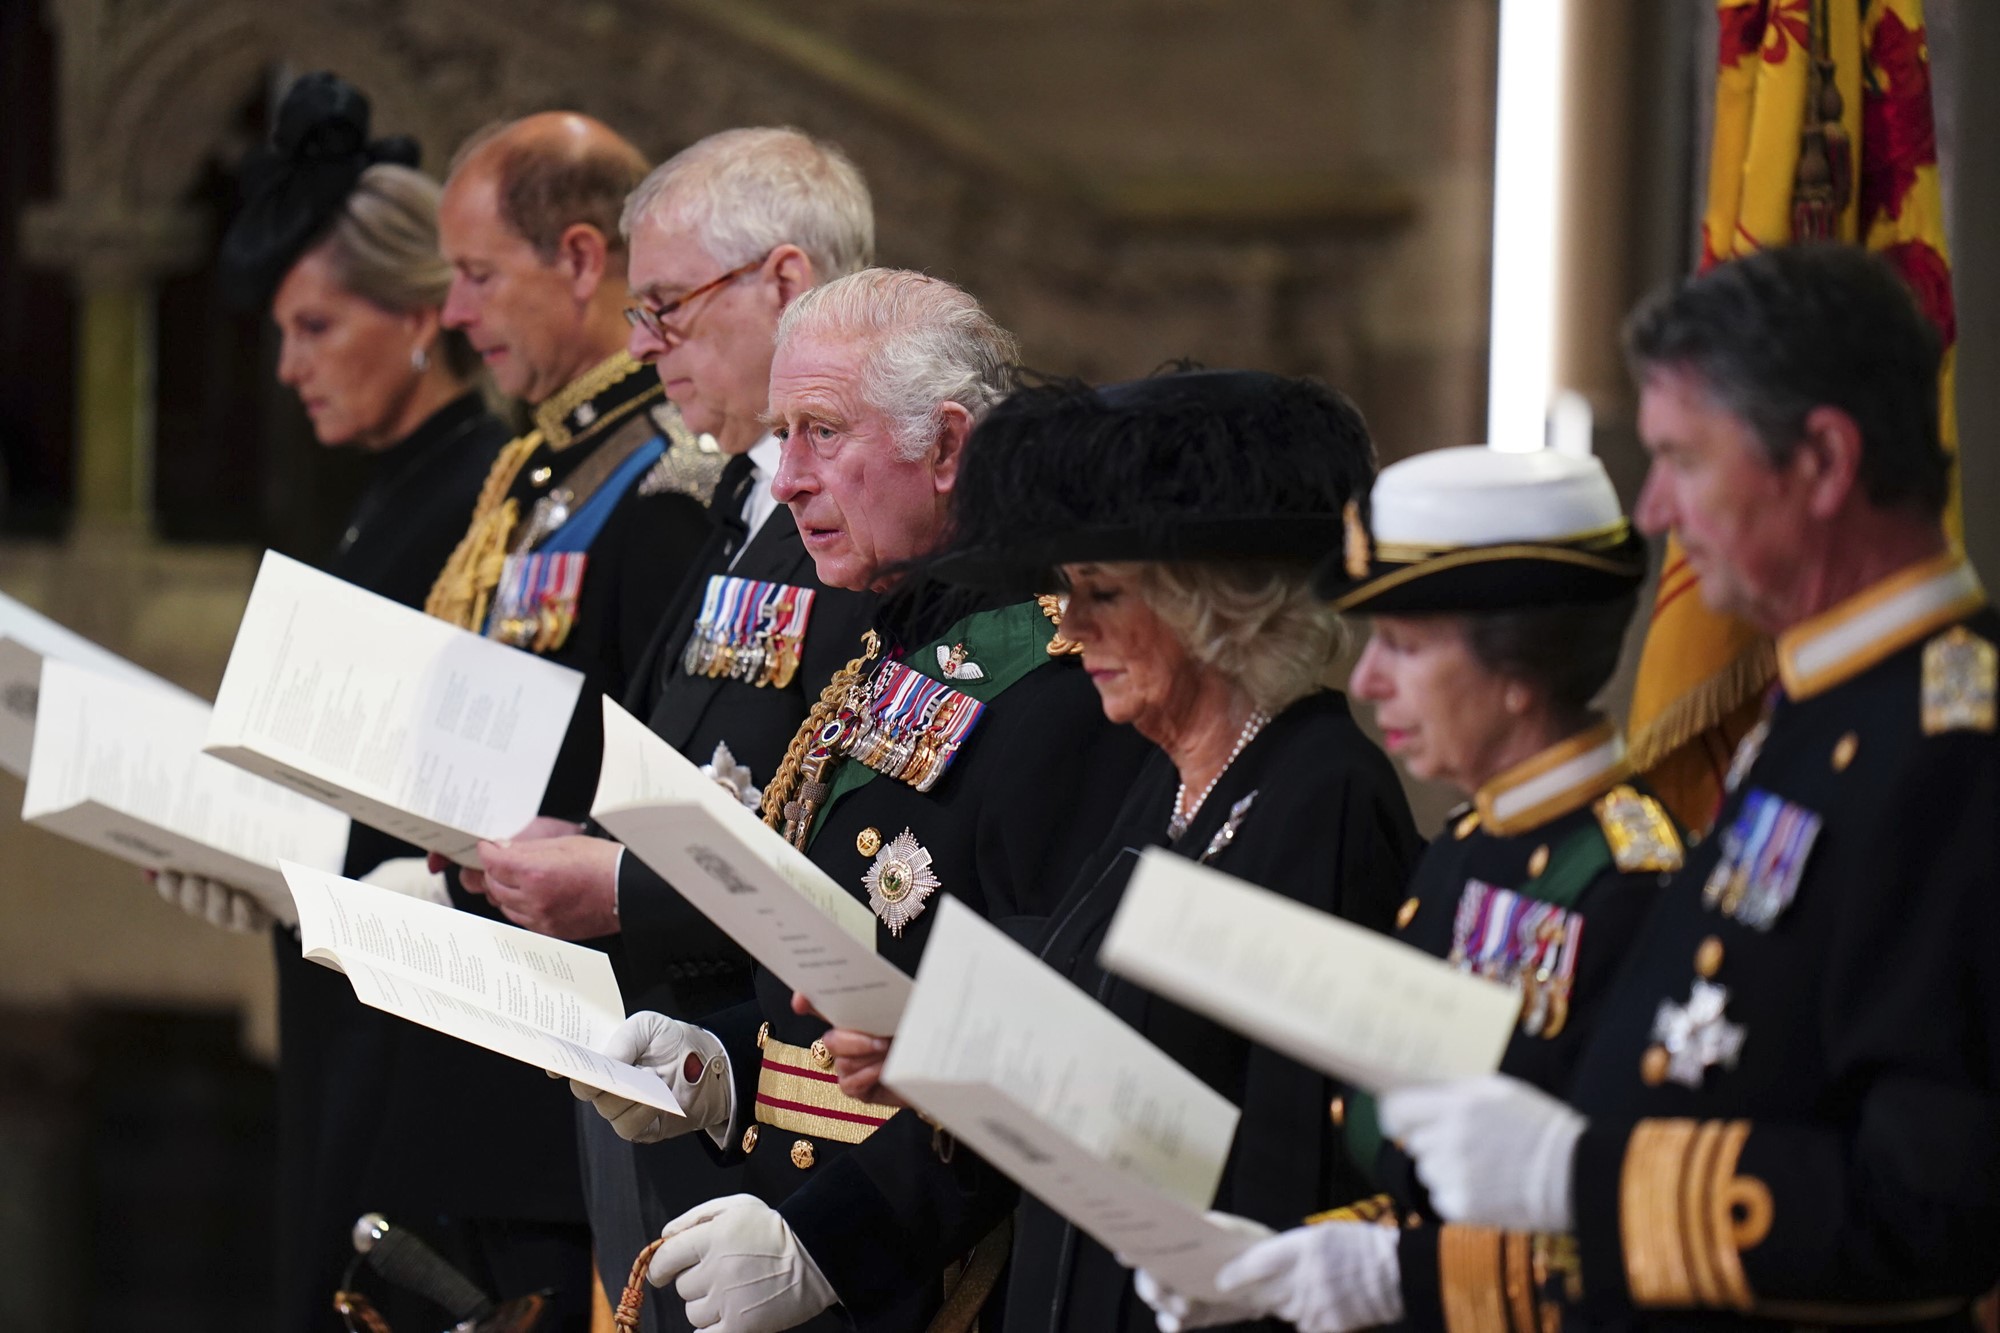 From left, Sophie Countess of Wessex, Prince Edward, Prince Andrew, King Charles III, Camilla, the Queen Consort, Princess Anne and Tim Laurence during a Service of Prayer and Reflection